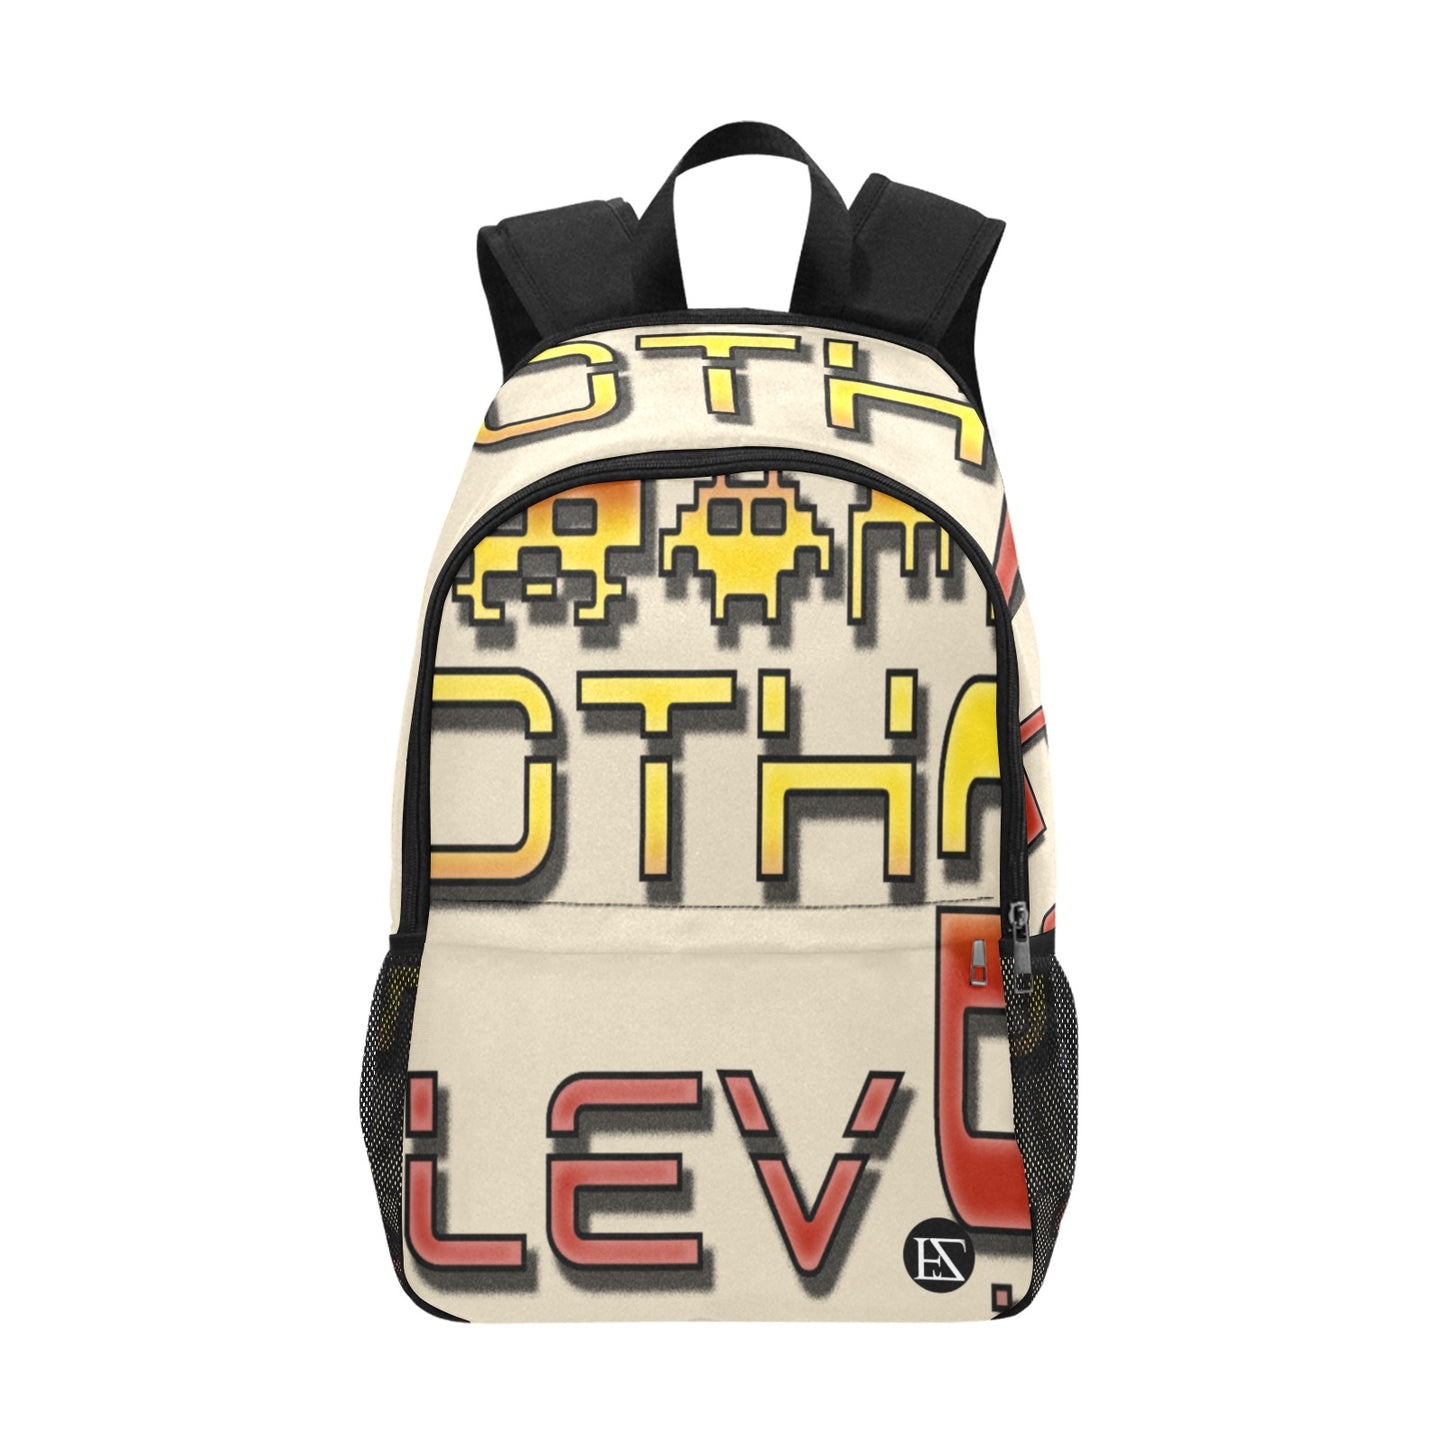 fz red levels backpack one size / fz levels backpack - creme all-over print unisex casual backpack with side mesh pockets (model 1659)